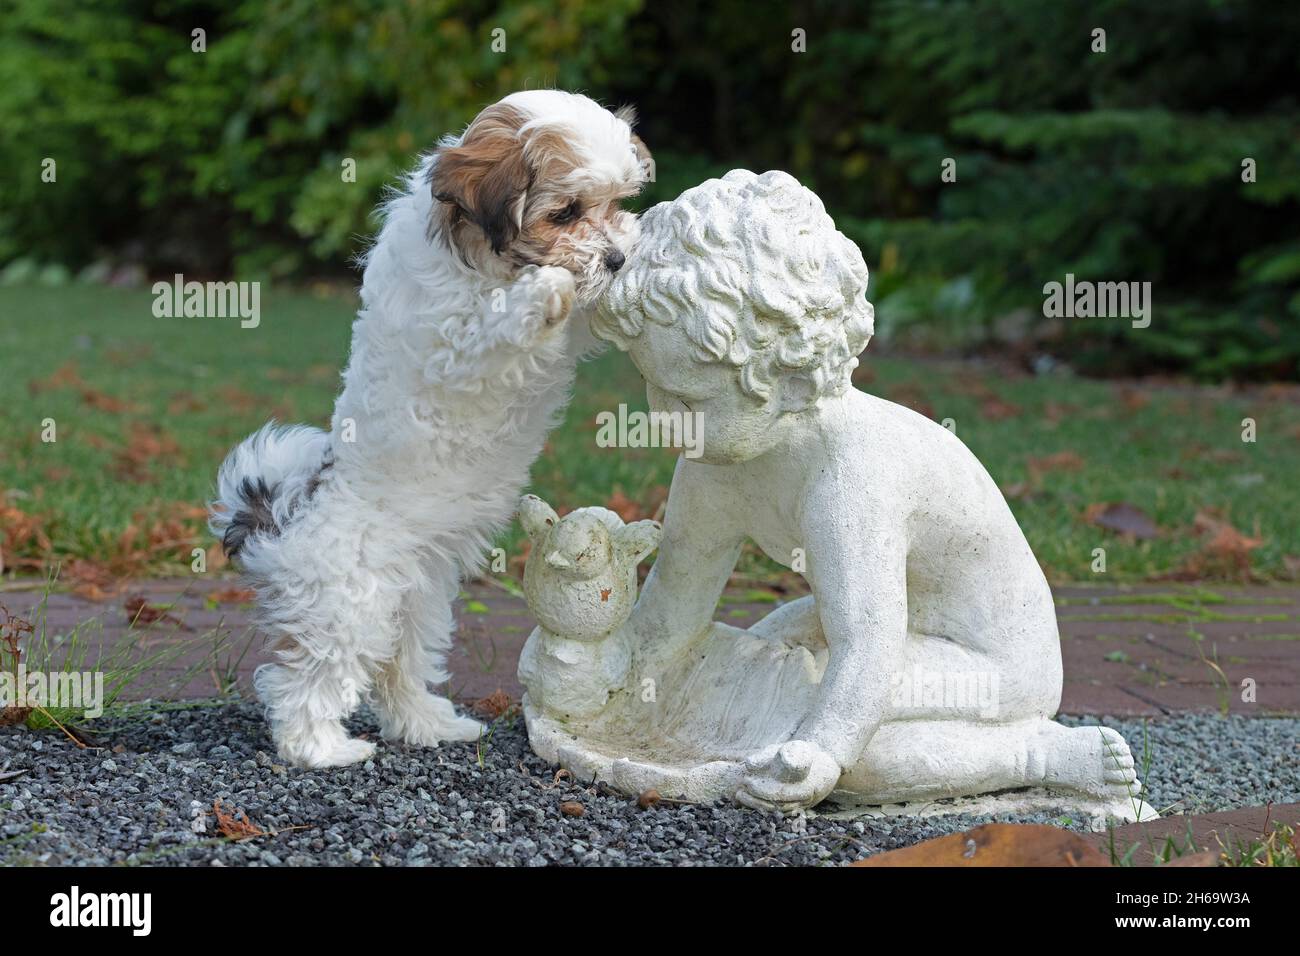 Bolonka Zwetna toy dog pup sitting up and begging beside garden sculpture, Germany Stock Photo